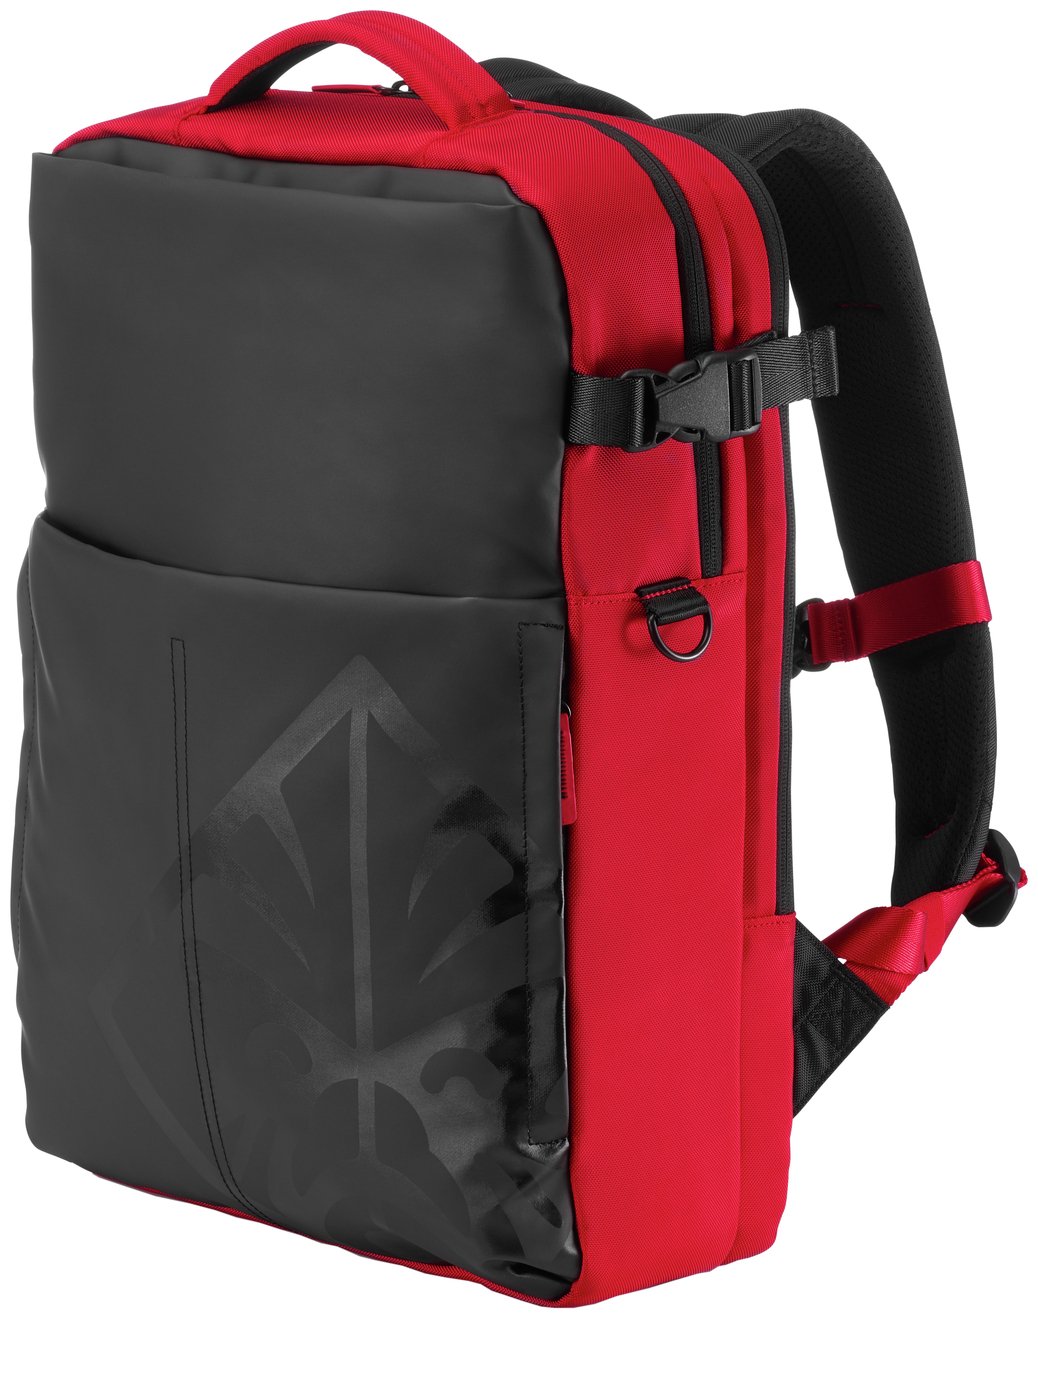 HP Omen 17.3 Inch Laptop Backpack Review